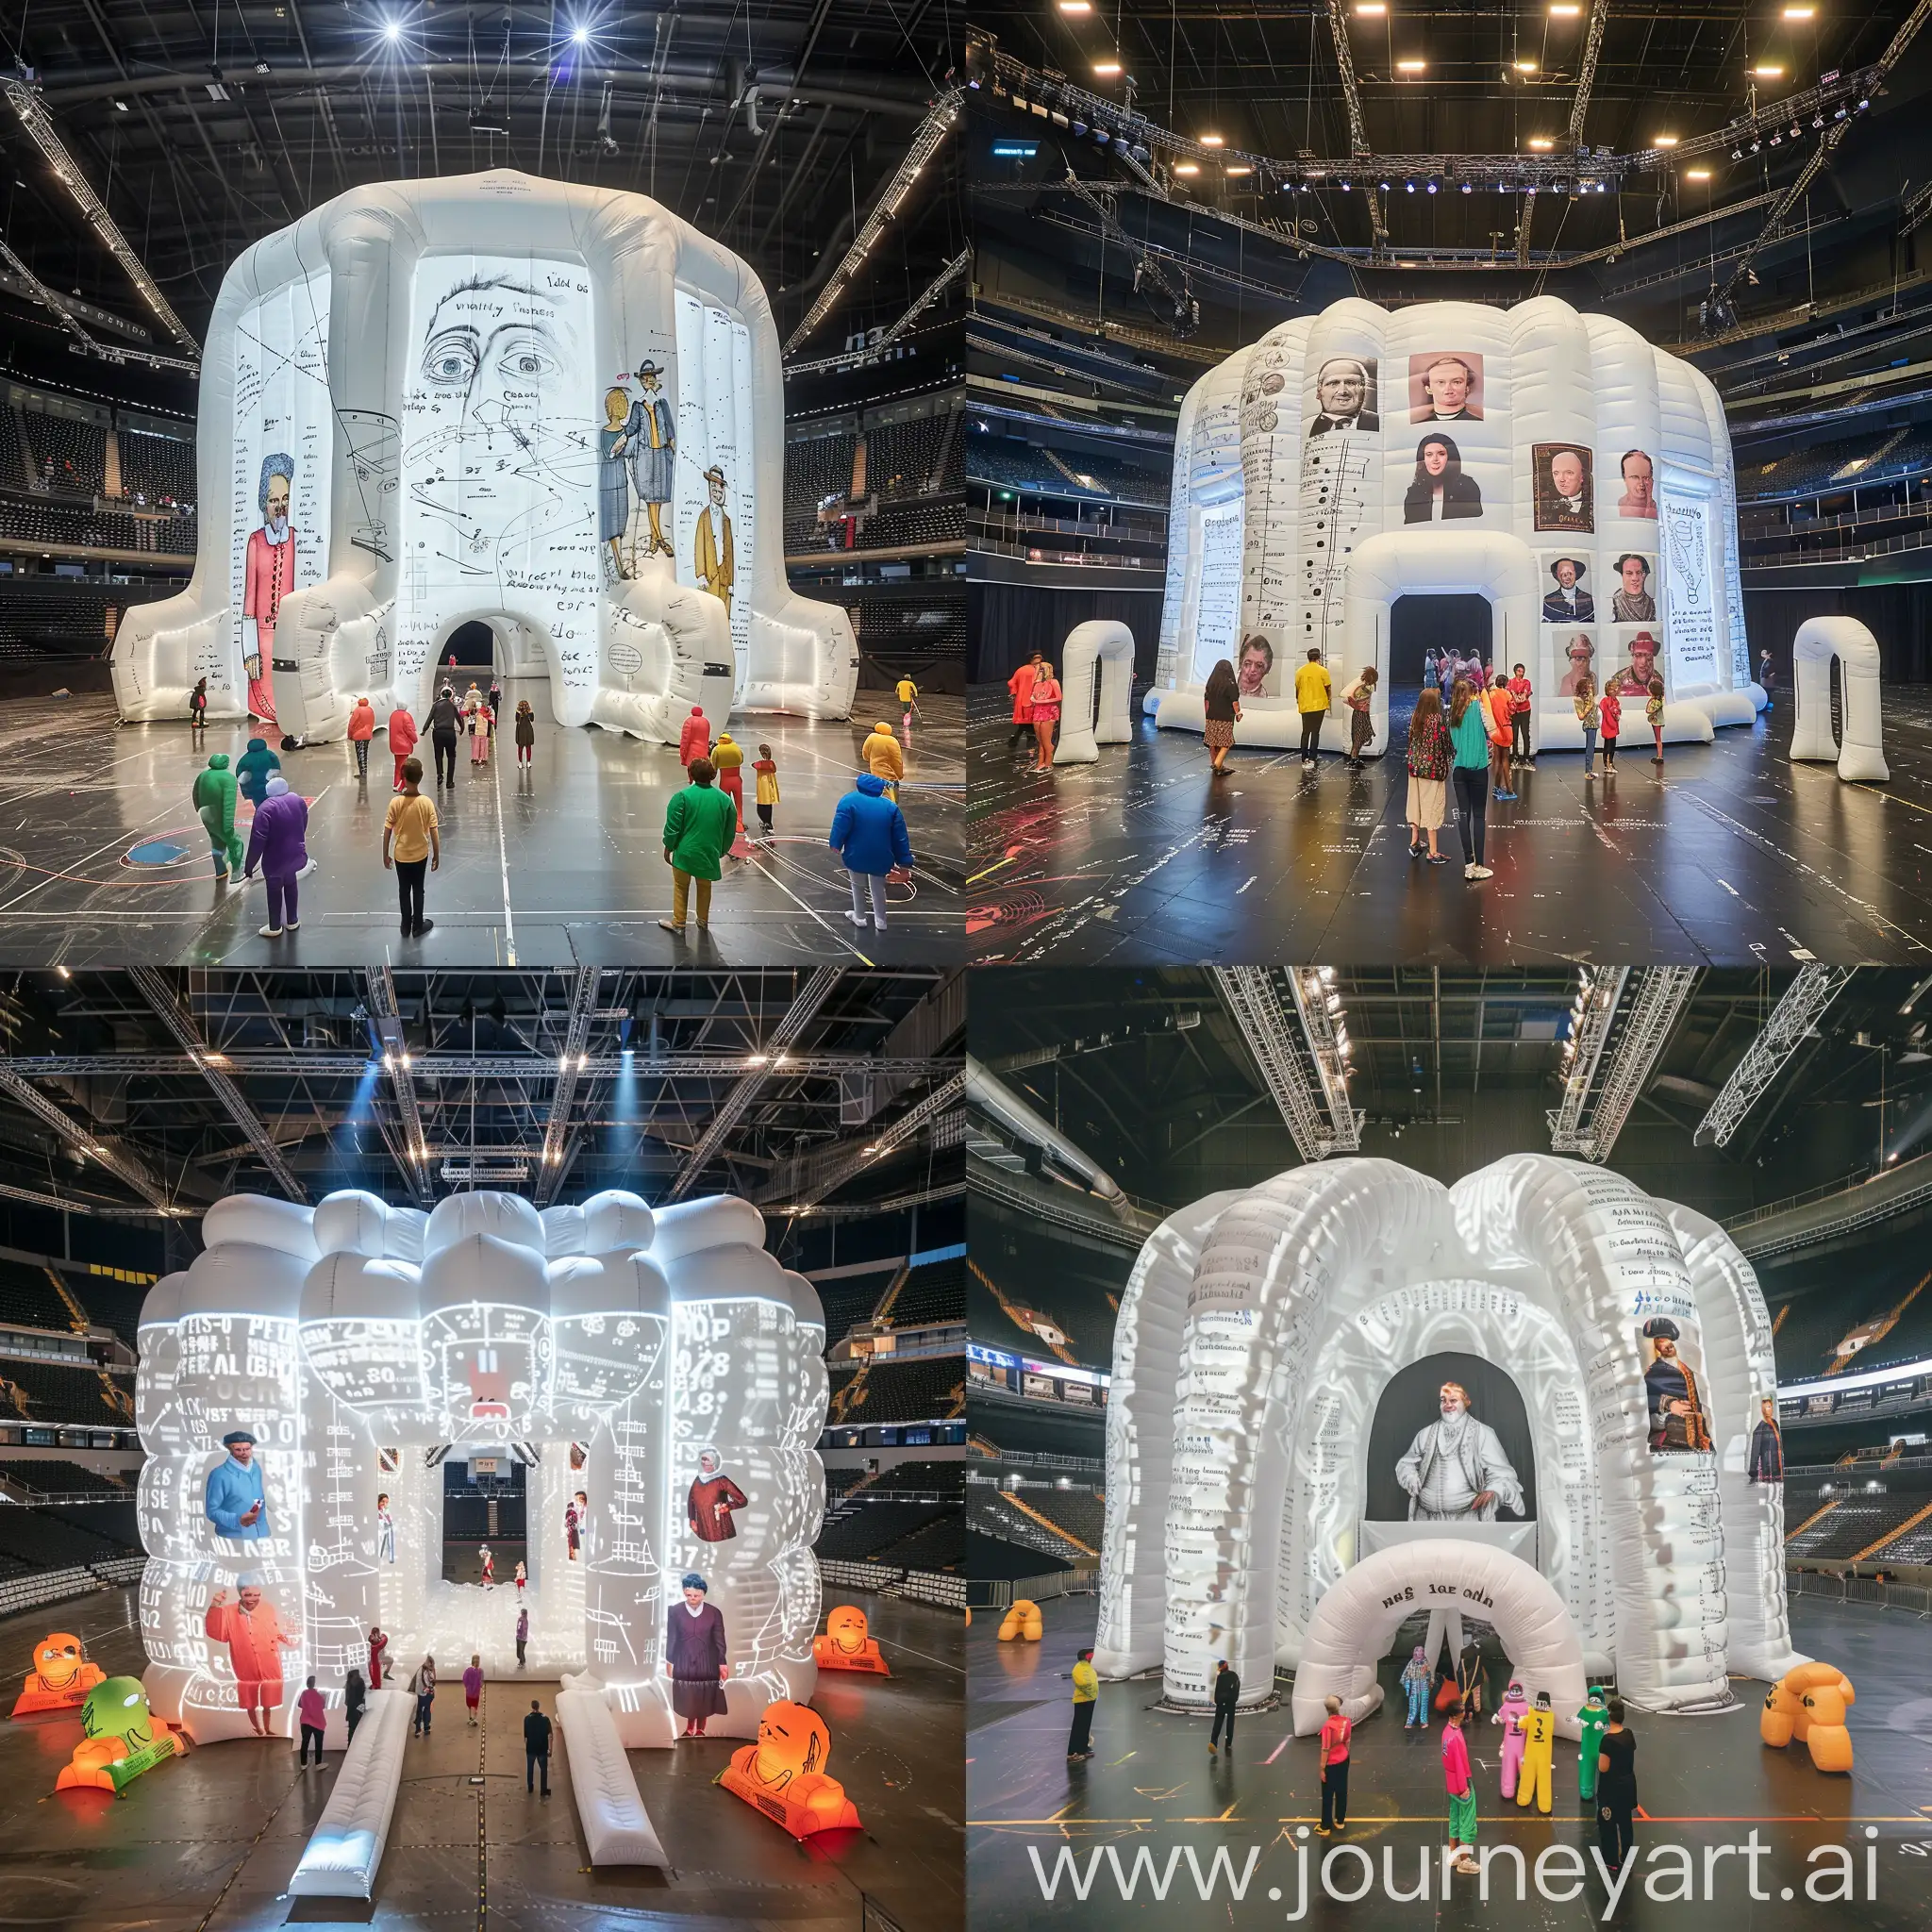 Seen inside the manchester arena is a centrally placed 15 meter by 15 meter white inflatable structure with entrance for happy colourful people. The inflatable structure is covered with projected images of historical clever people. The arena floor and walls are covered with projected scientific formula. There are smaller inflatable structure surrounding the central structure